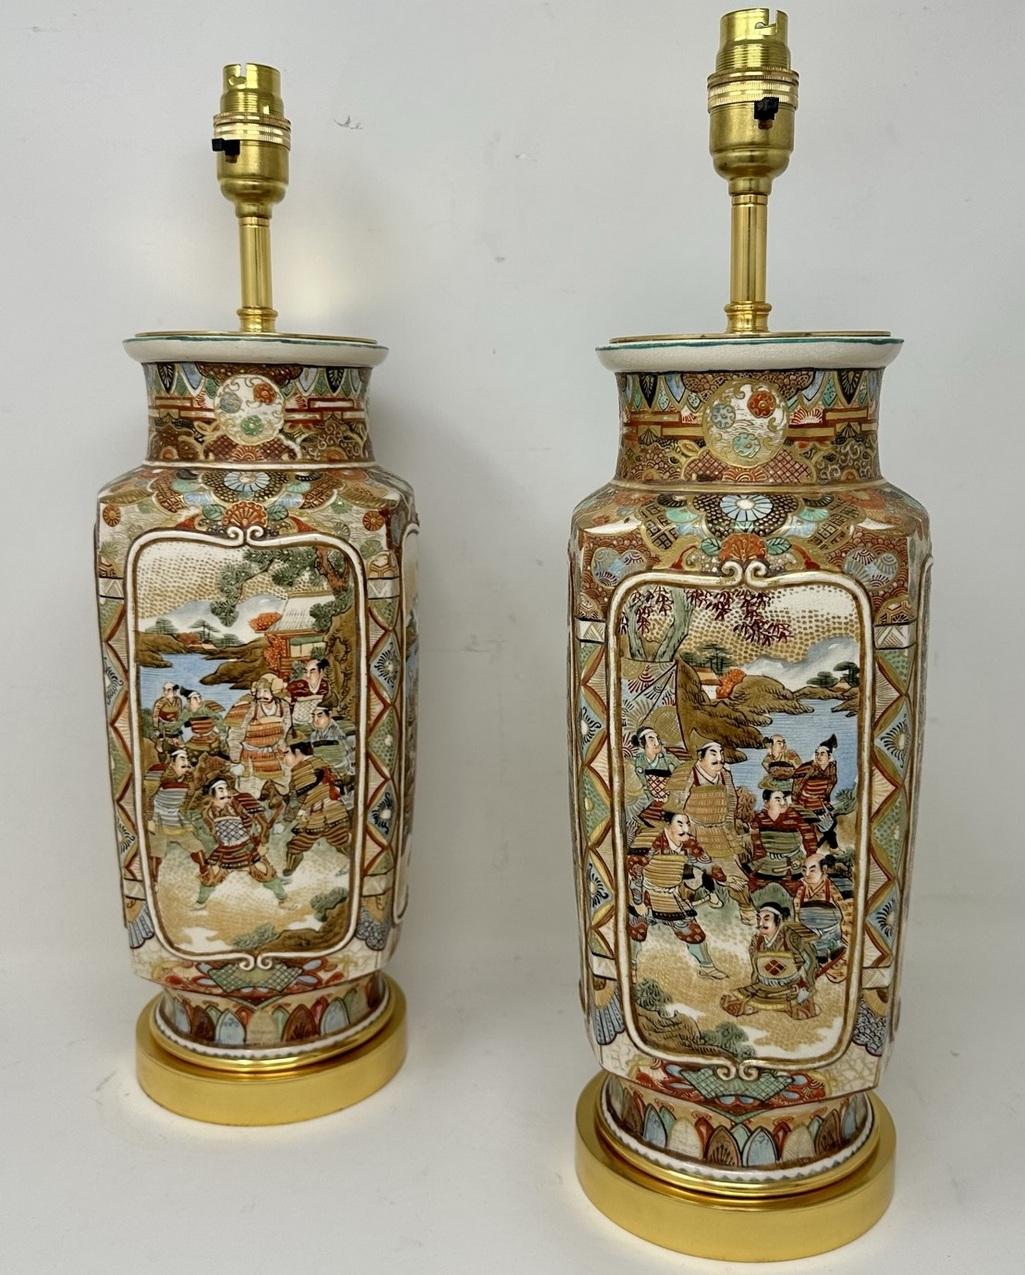 Stunning Pair of large early Meiji period Satsuma heavy gauge earthenware four-sided Japanese Vases, now converted to a Pair of Electric Table Lamps. These beautiful Satsuma-ware vases were made during the Meiji period (1868-1912), in this